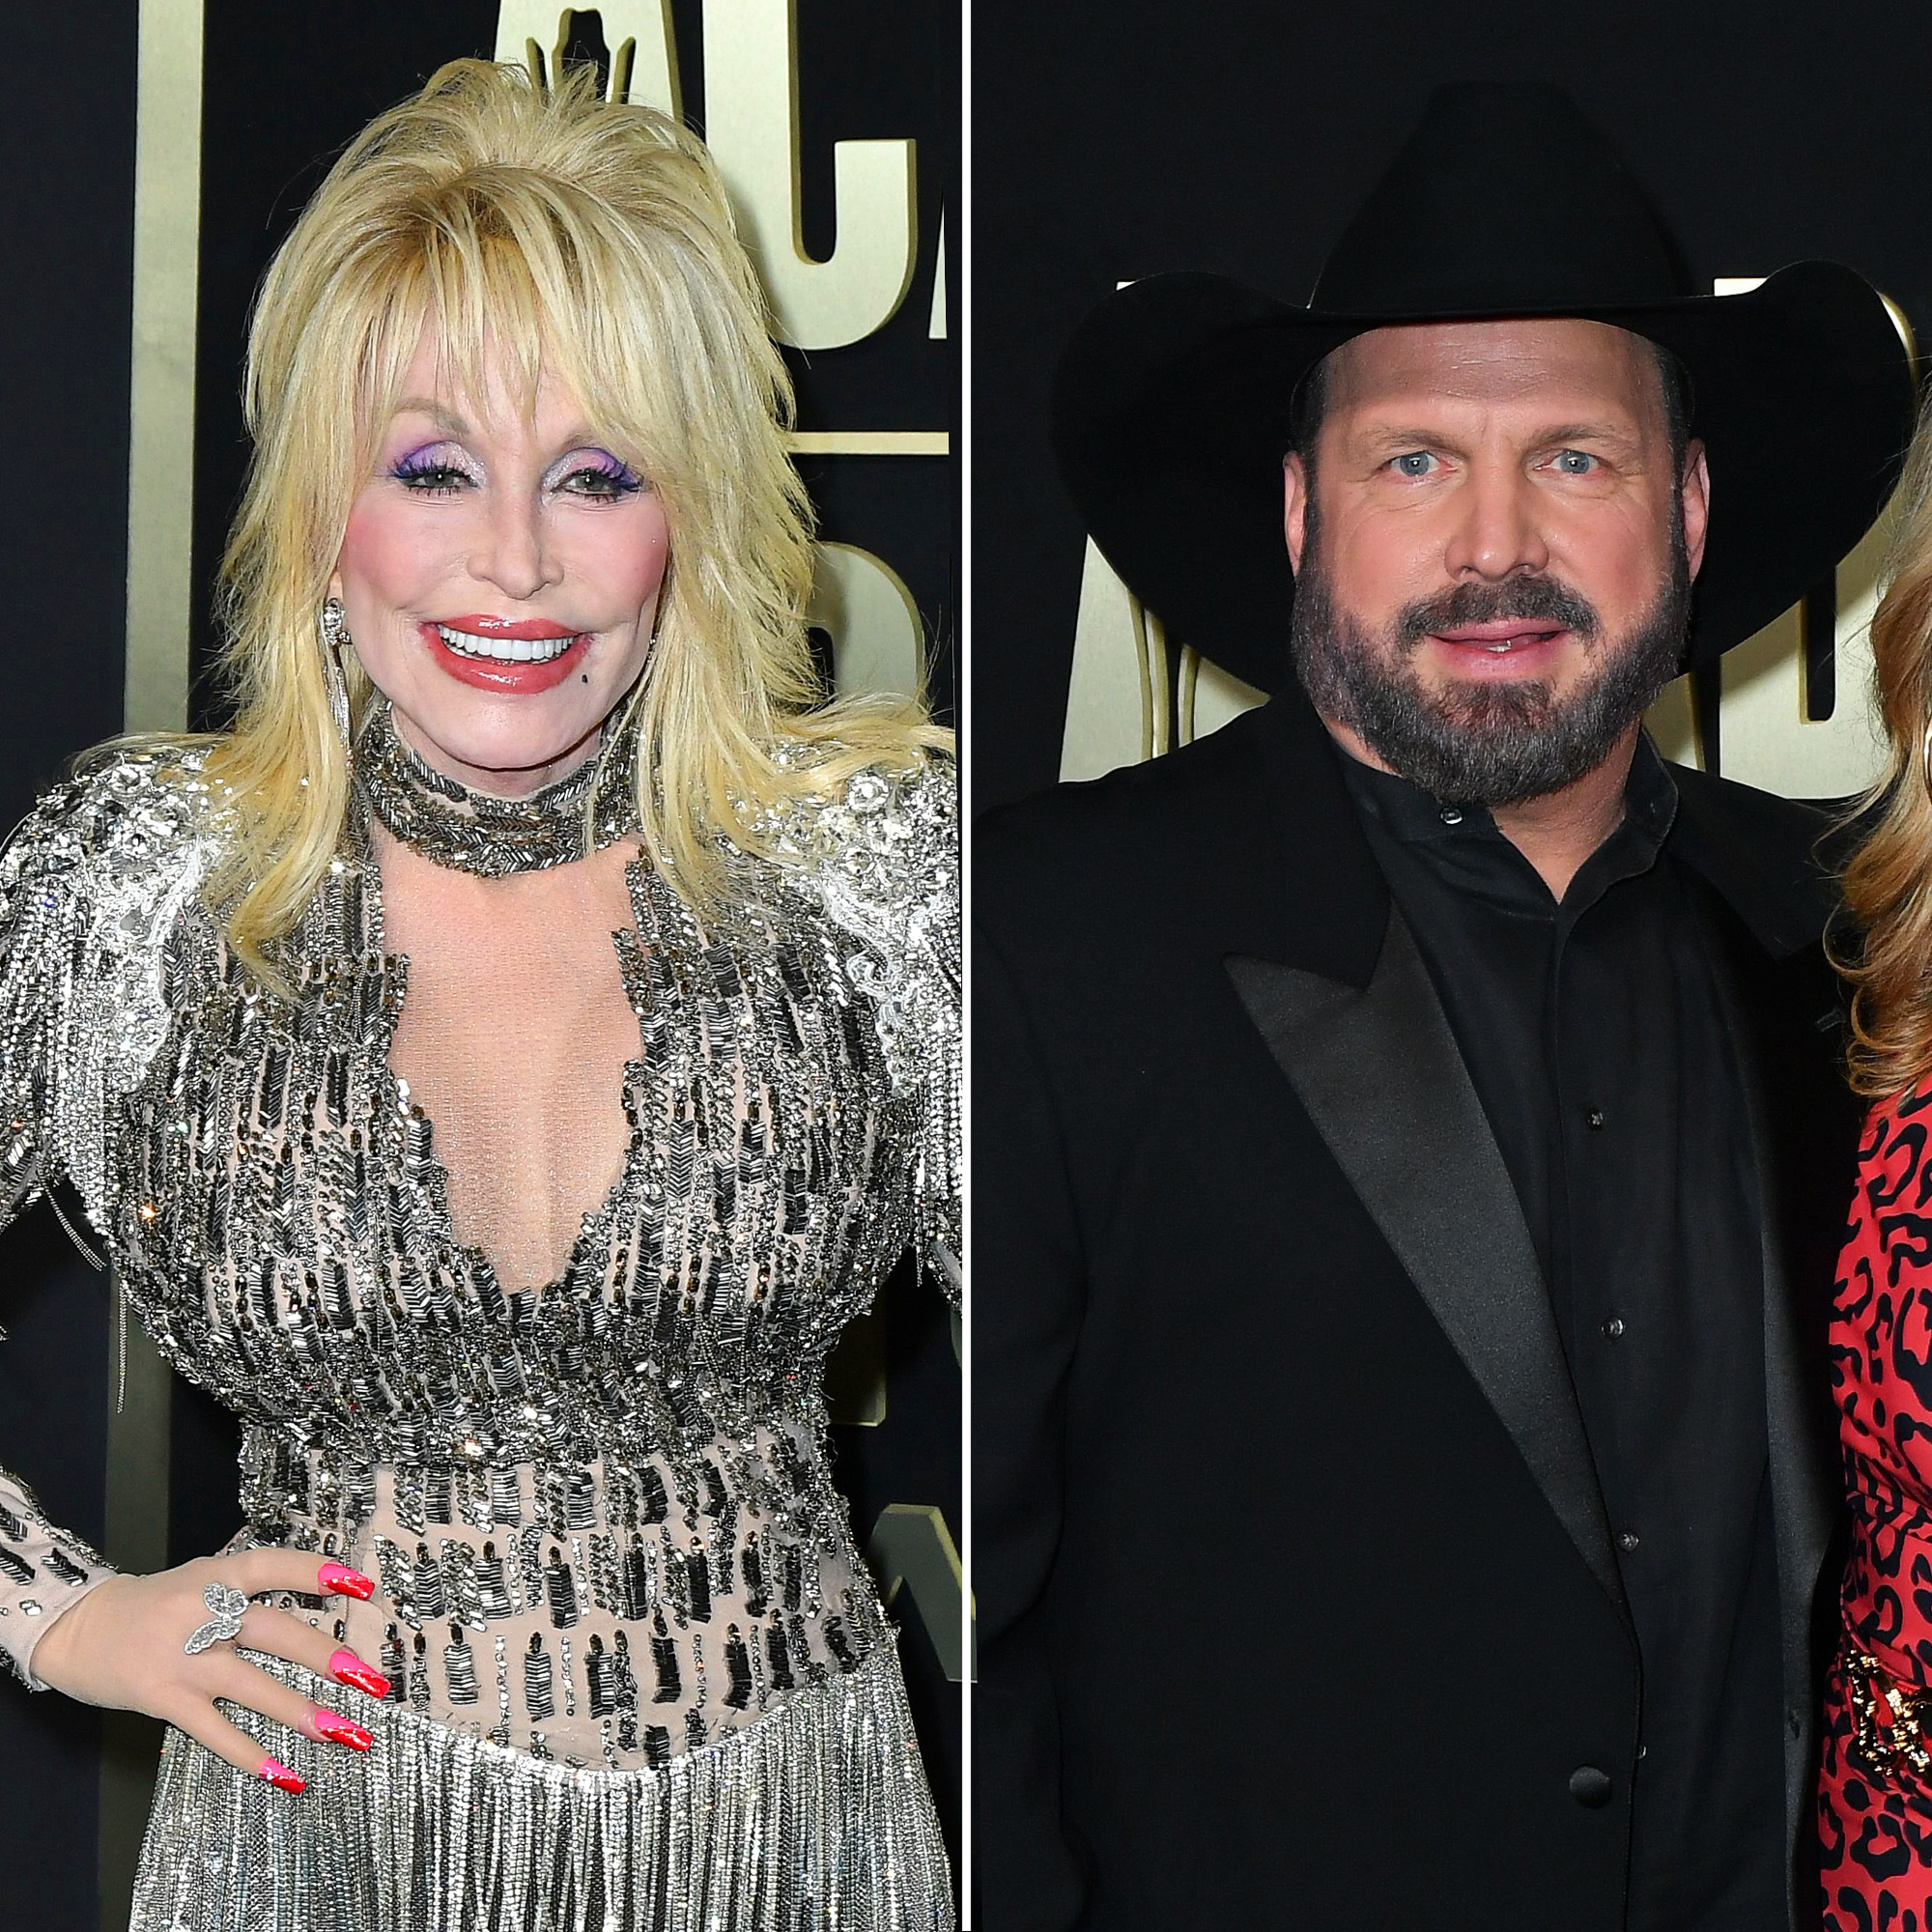 ACM Awards 2023: Full List of Nominees and Winners